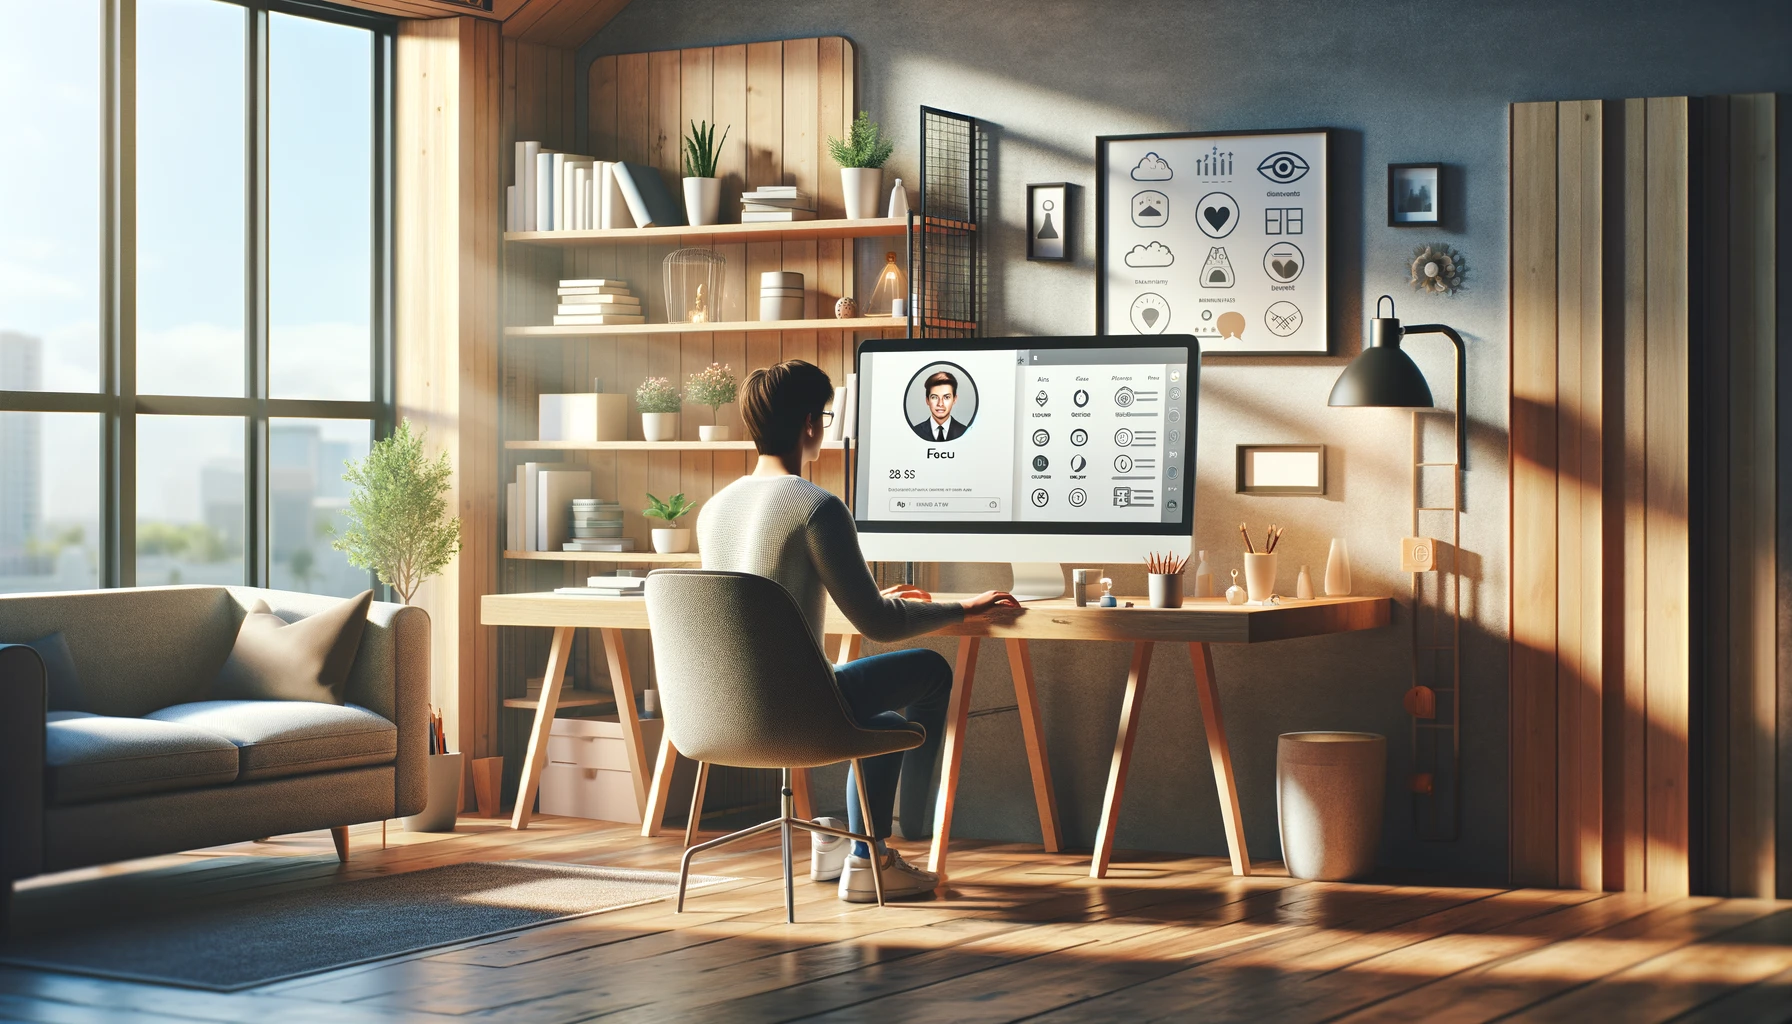 A modern and inviting home office scene with a person seated at a desk engaging with a computer displaying a simple, user-friendly AI interface. The room is filled with natural light, and the desk is adorned with plants and books, creating a comfortable and inspiring workspace. The AI interface on the screen features icons representing the 'FOCUS' strategy, blending seamlessly into the tranquil and creative atmosphere of the room.